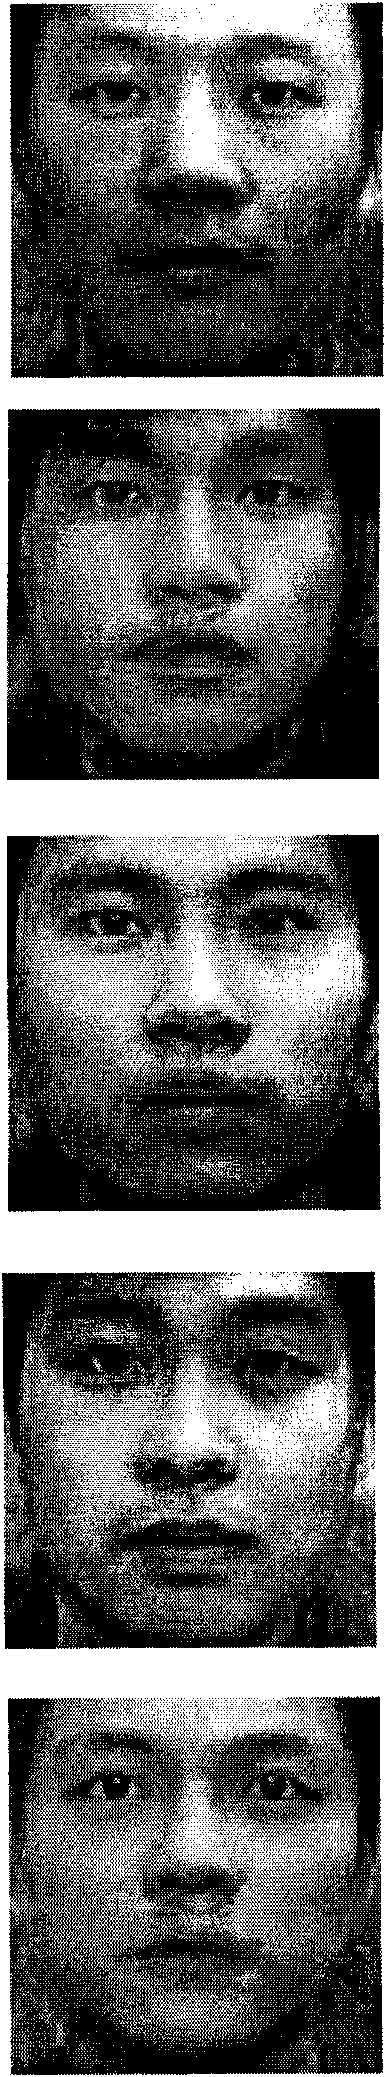 Face super-resolution image processing method based on double-manifold alignment